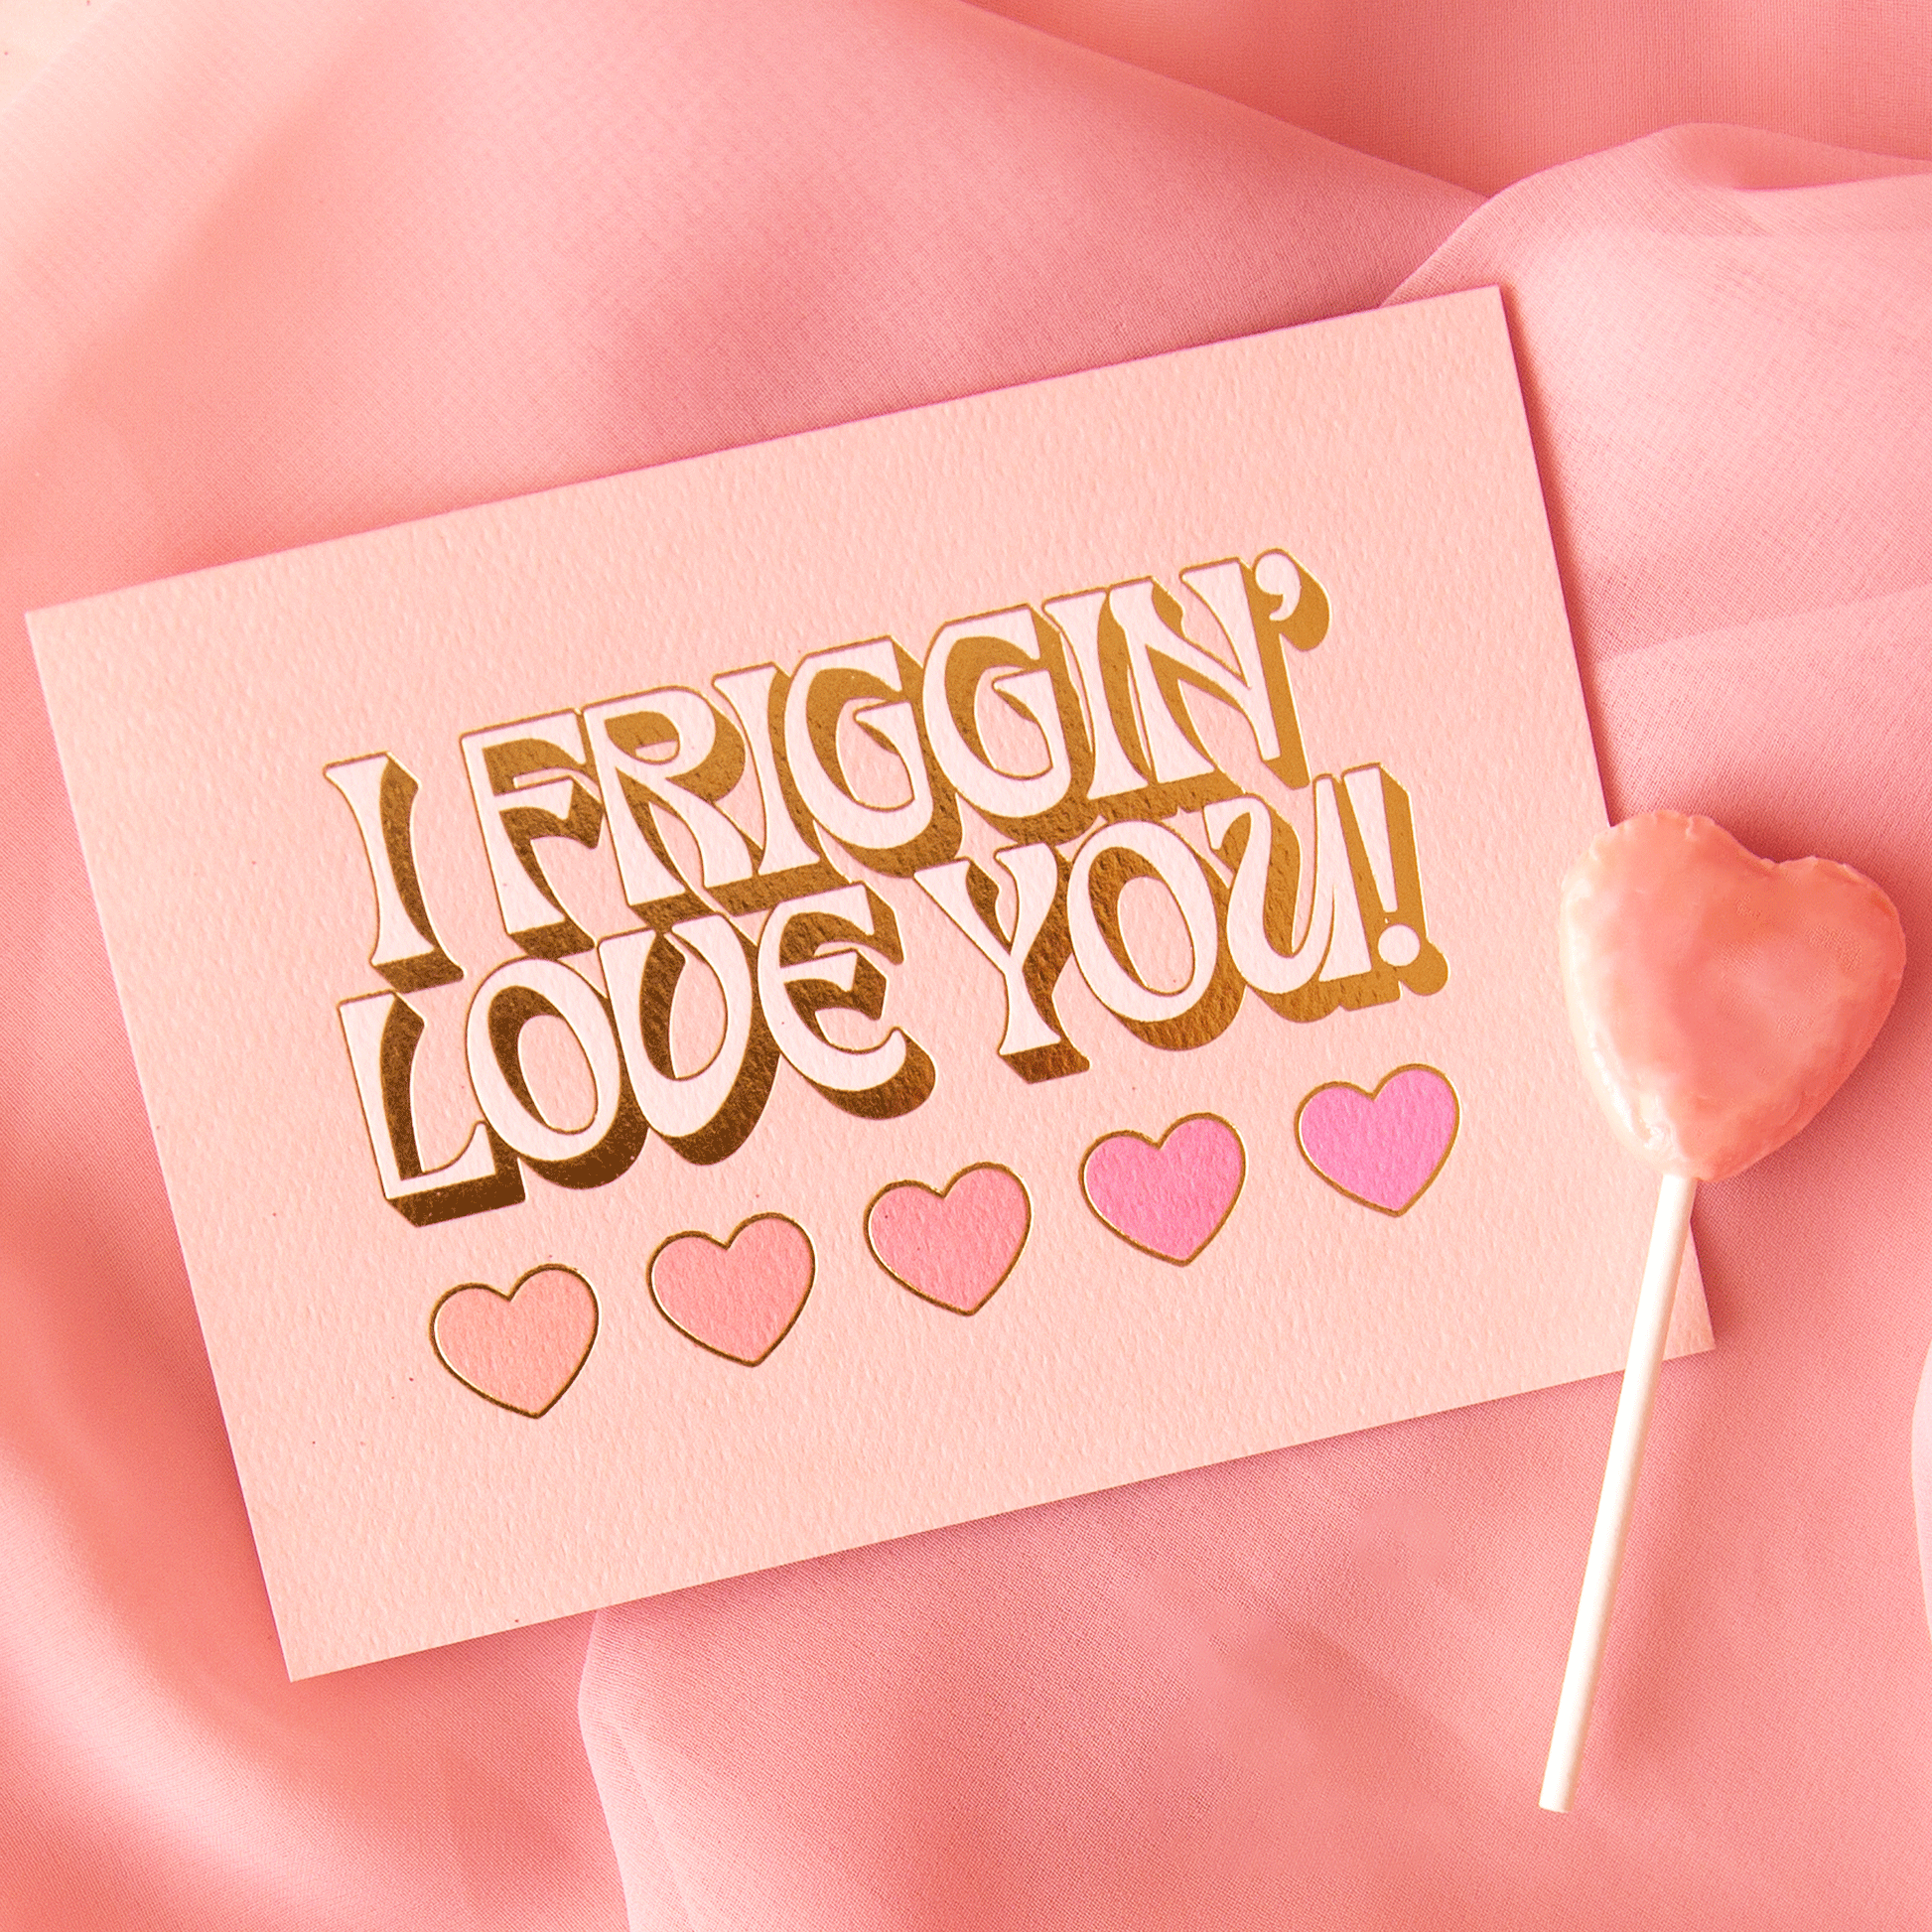 On a pink background is a light pink card with text that reads, "I Friggin' Love You!" with five hearts underneath and staged next to a heart shaped sucker that is not included with purchase.